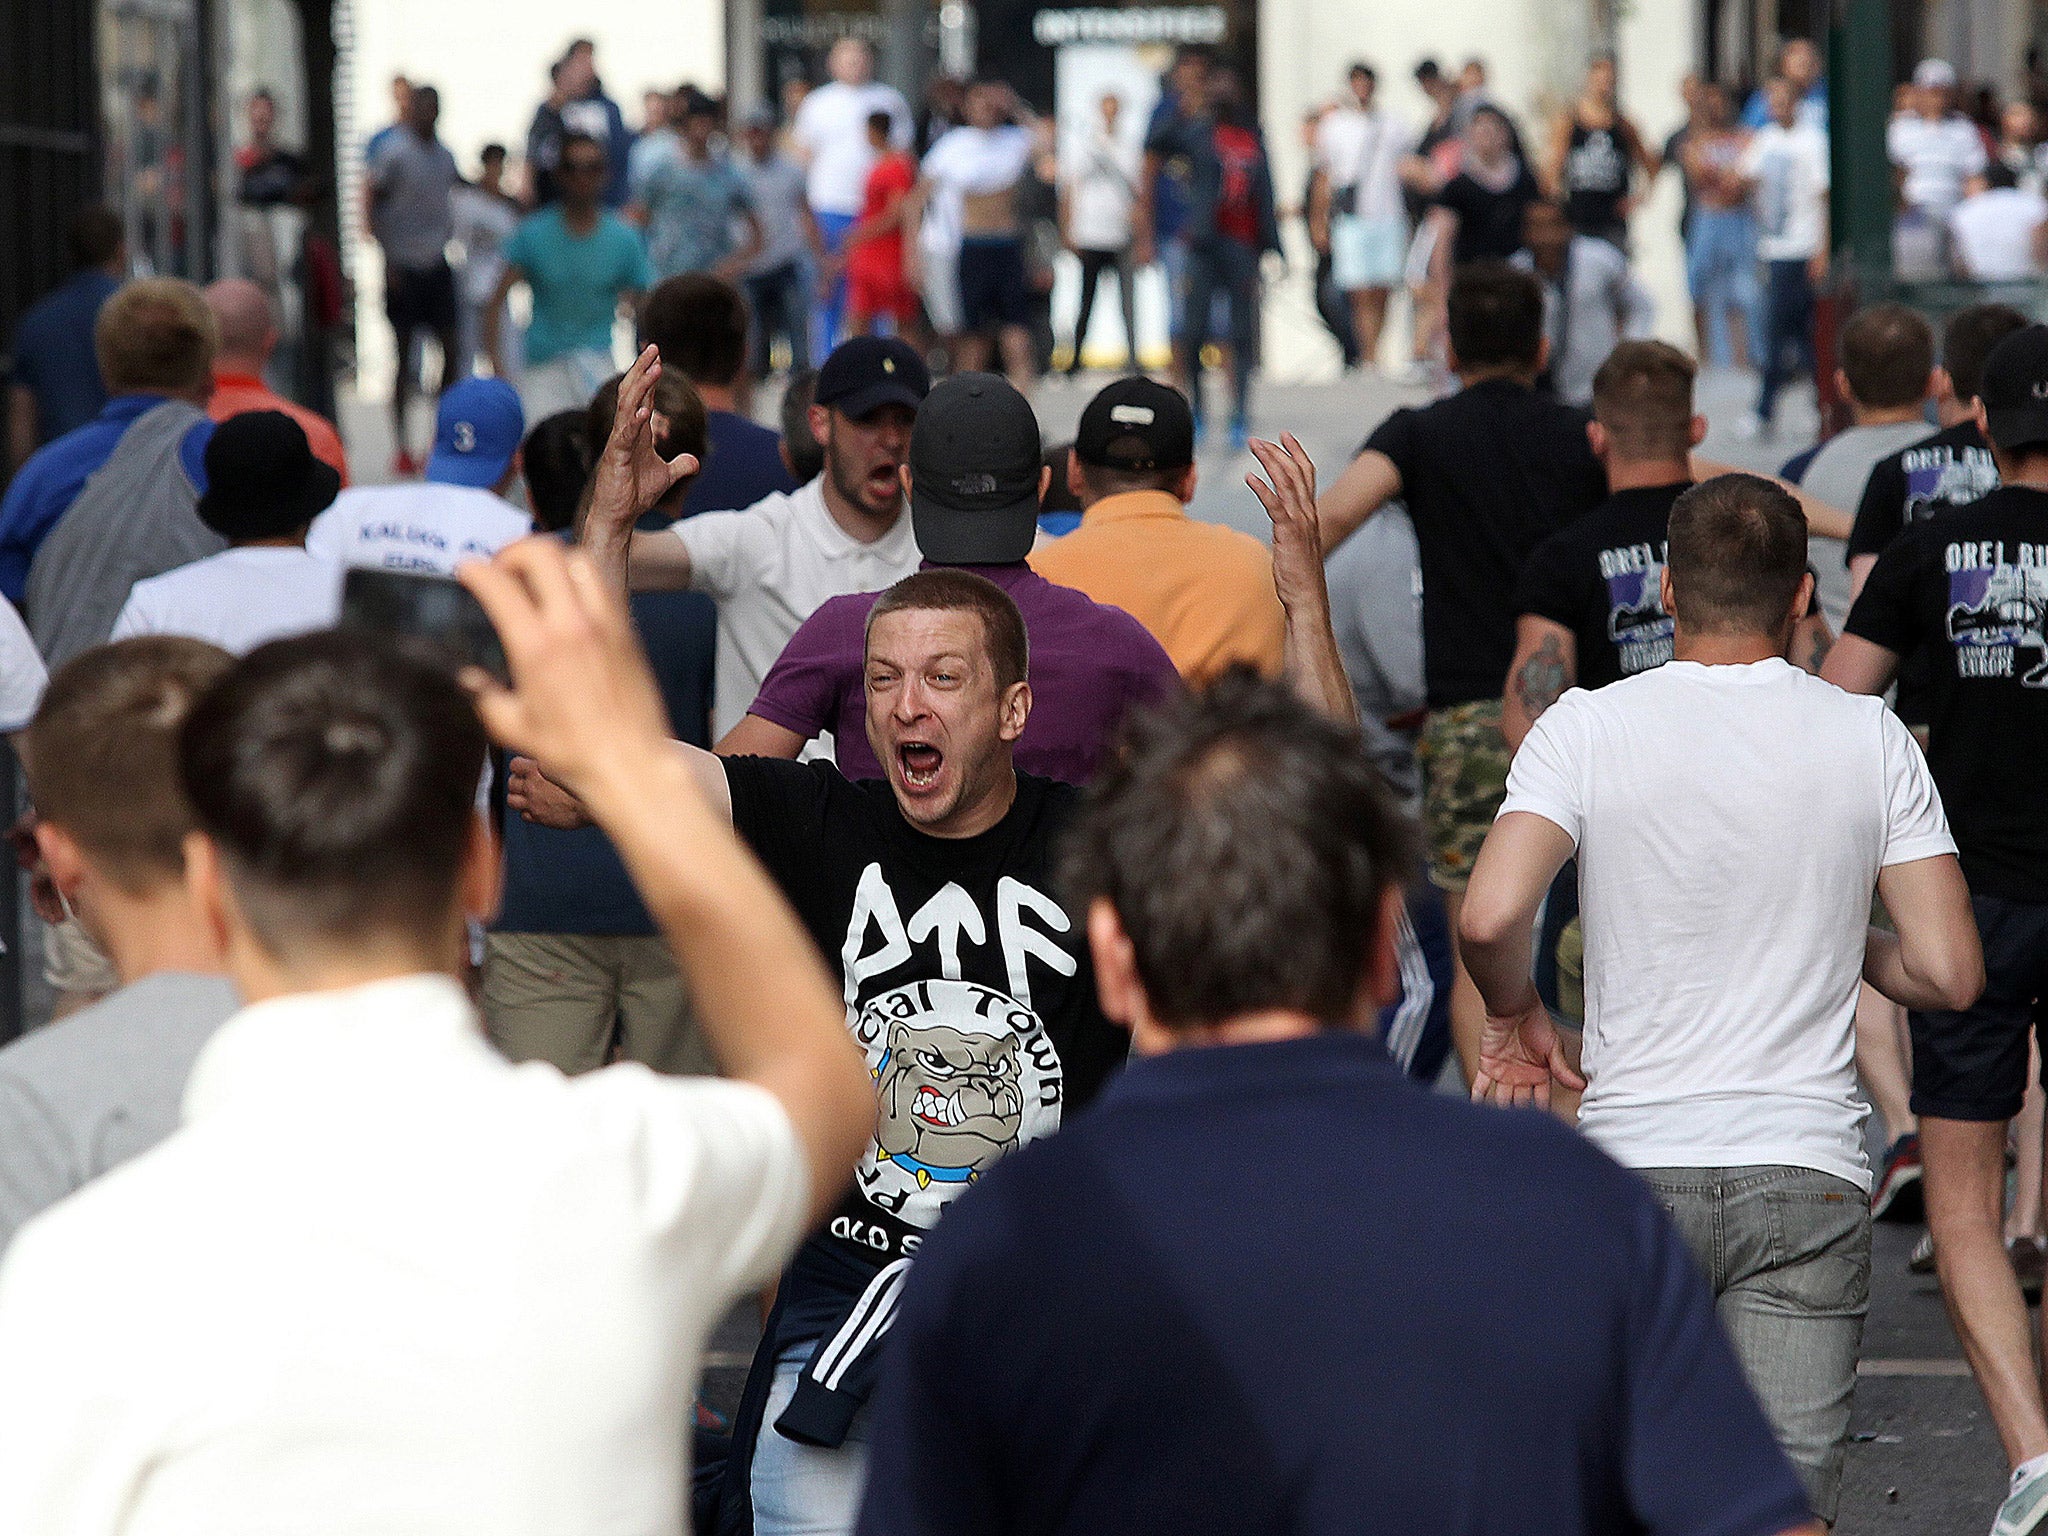 Russia and England fans clashed in Marseille before and after Saturday's Euro 2016 Group B clash